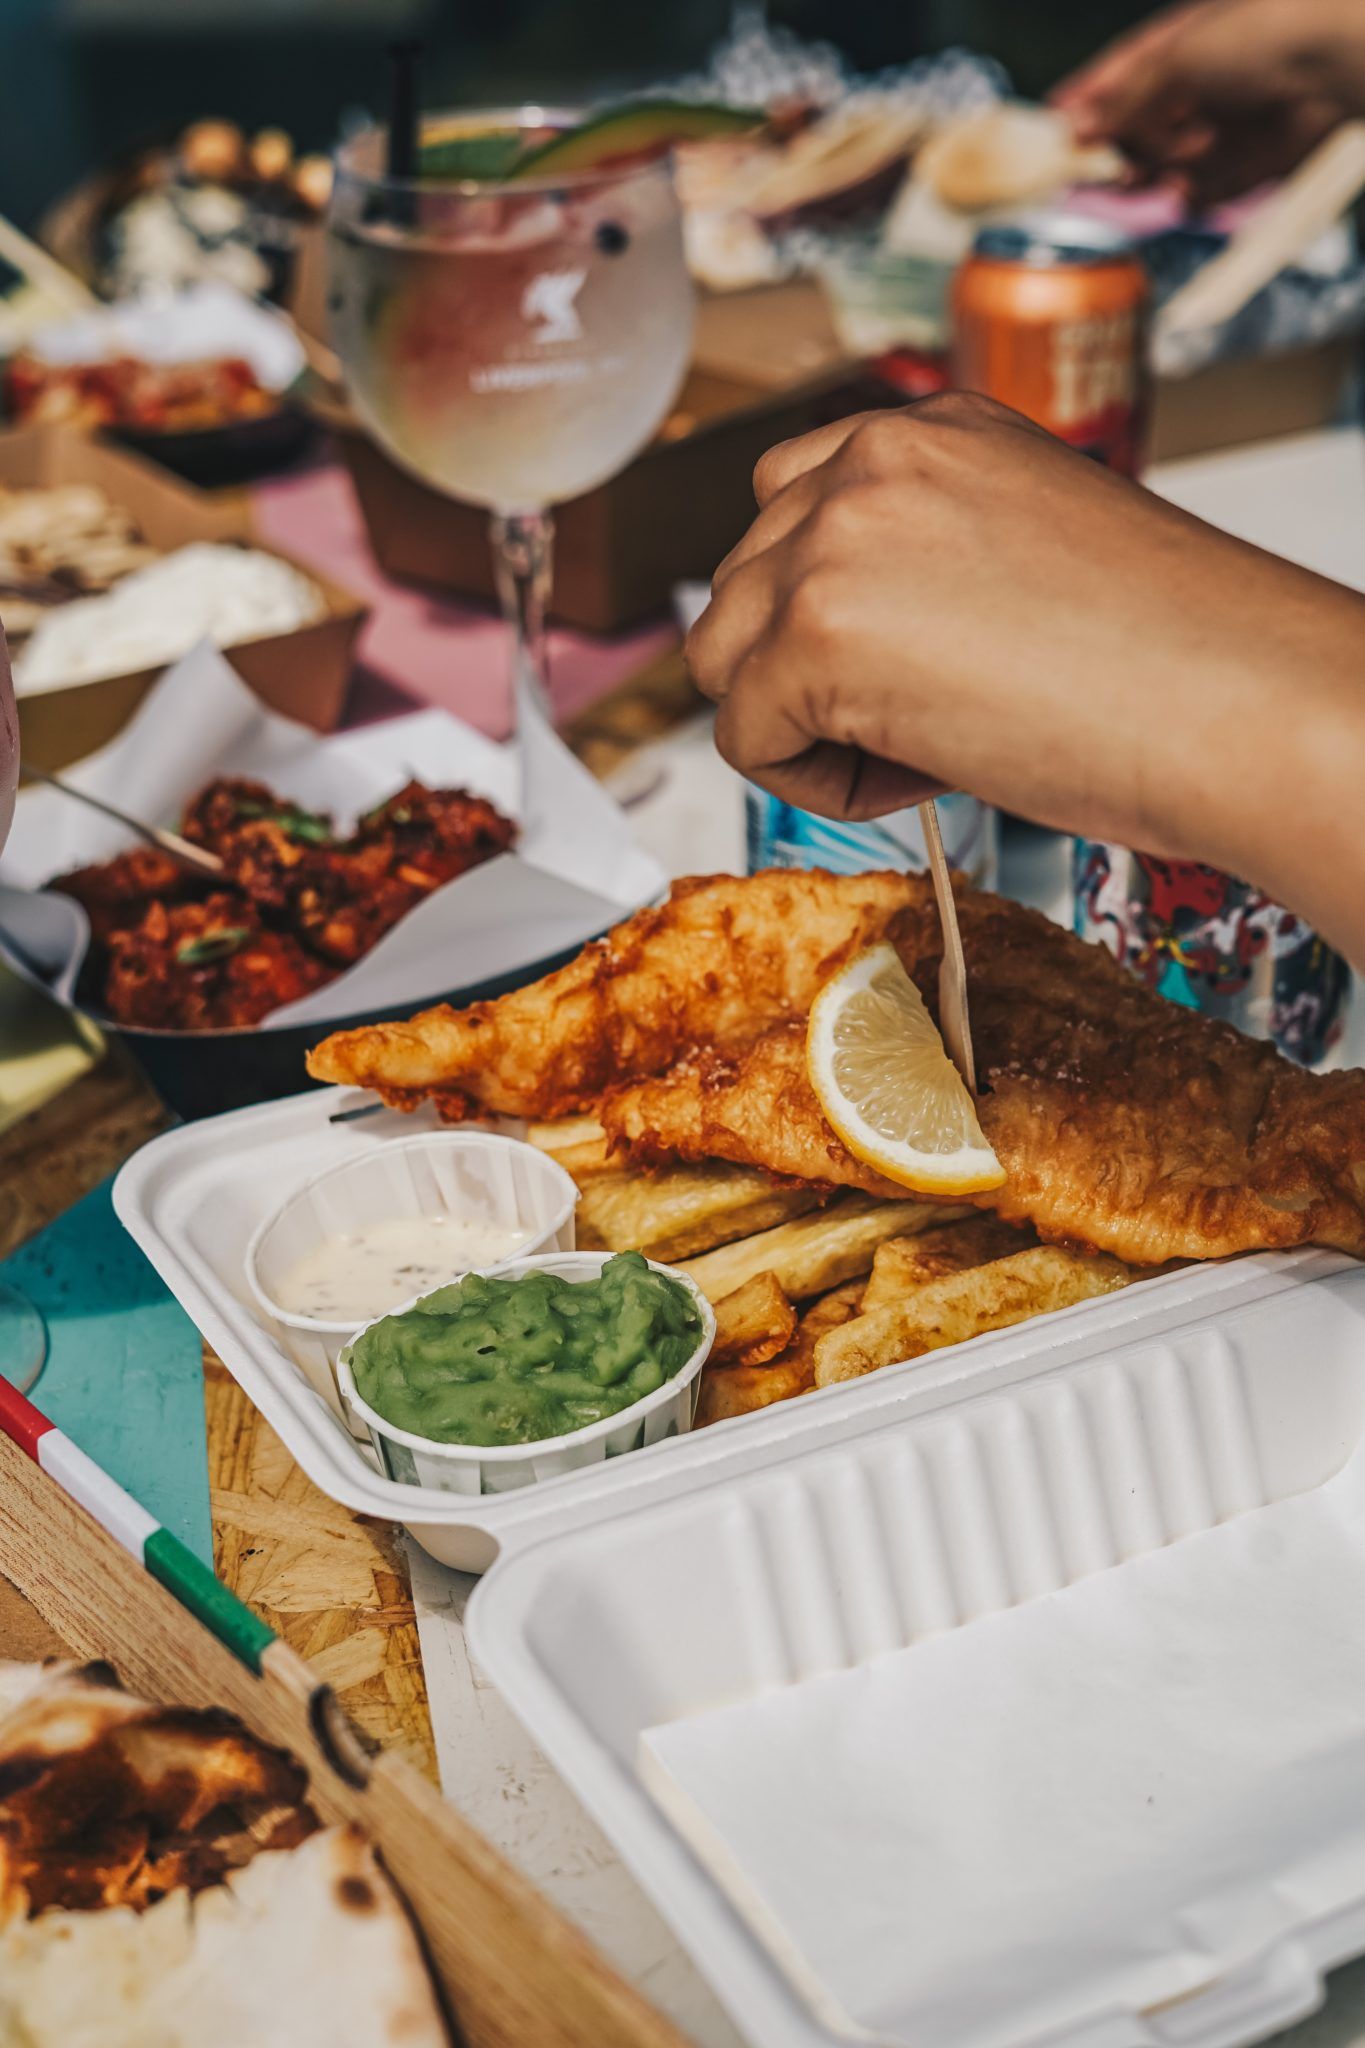 Fish and chips could be off the menu this Summer over rising fuel costs